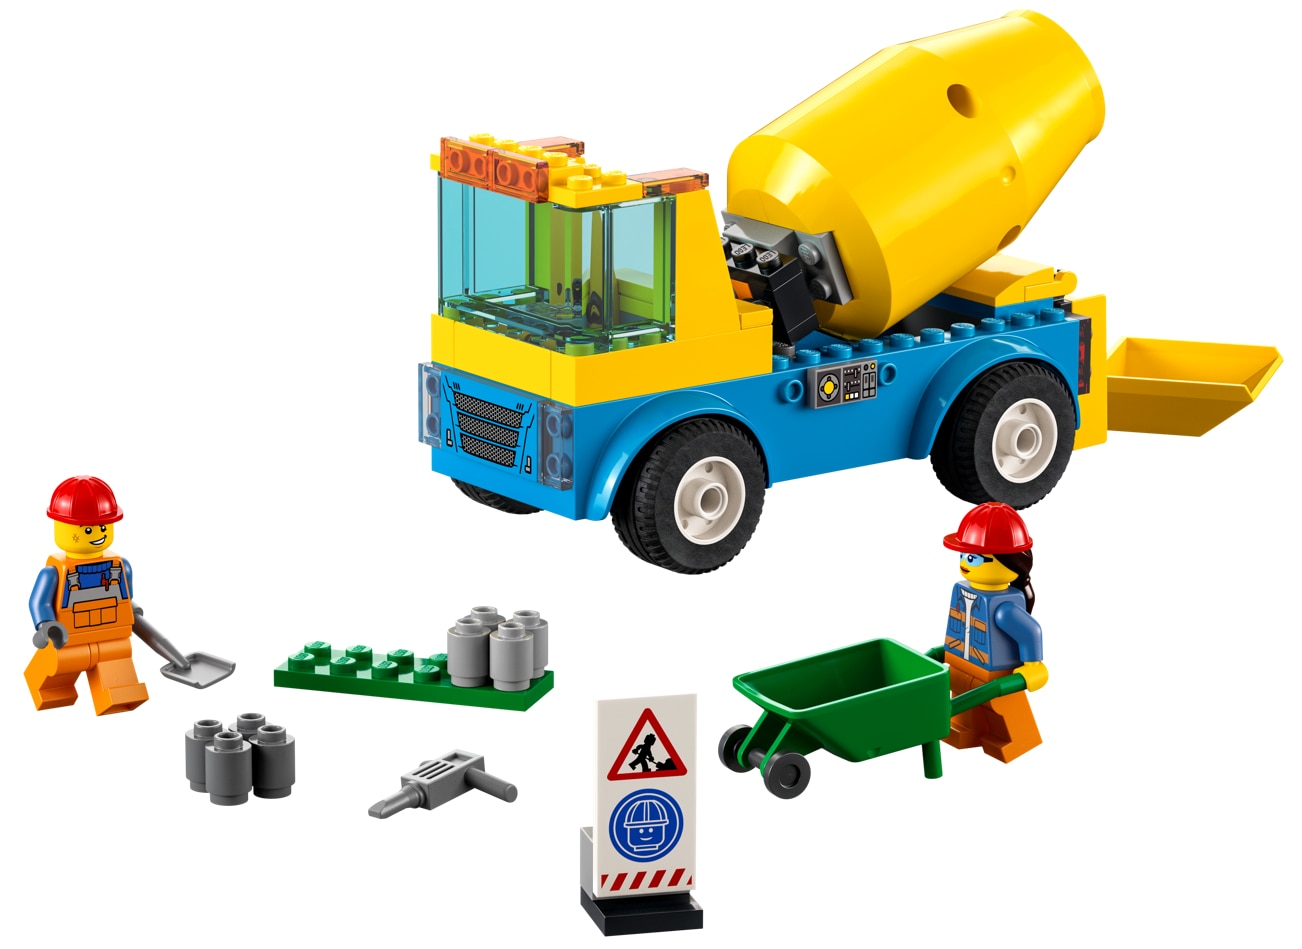 A picture containing LEGO, toy  Description automatically generated